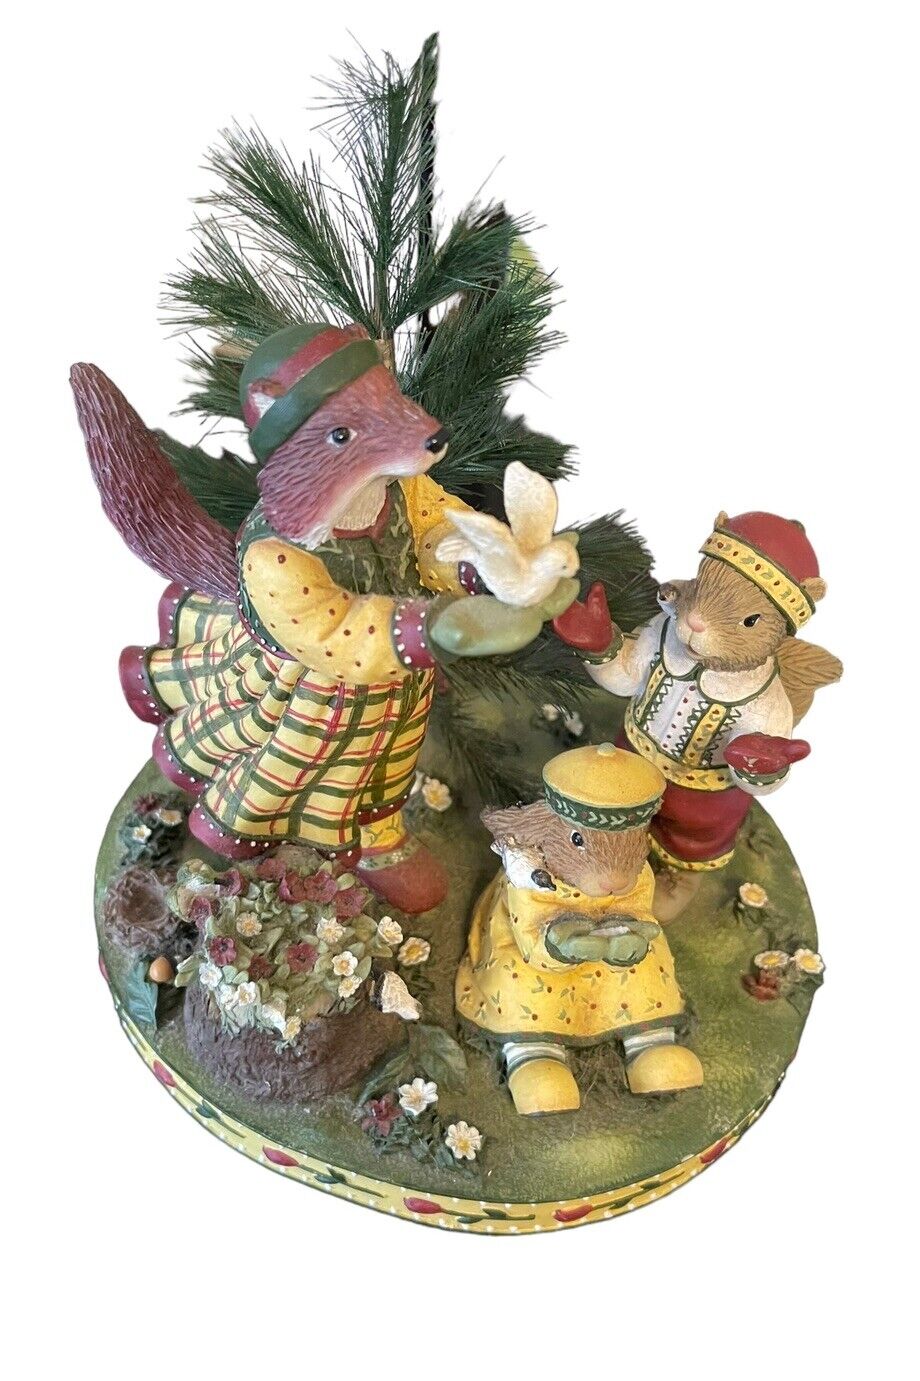 Demdaco Woodsong “Free to Fly” Figurine with Wildlife, Birds, and Flowers 2002 